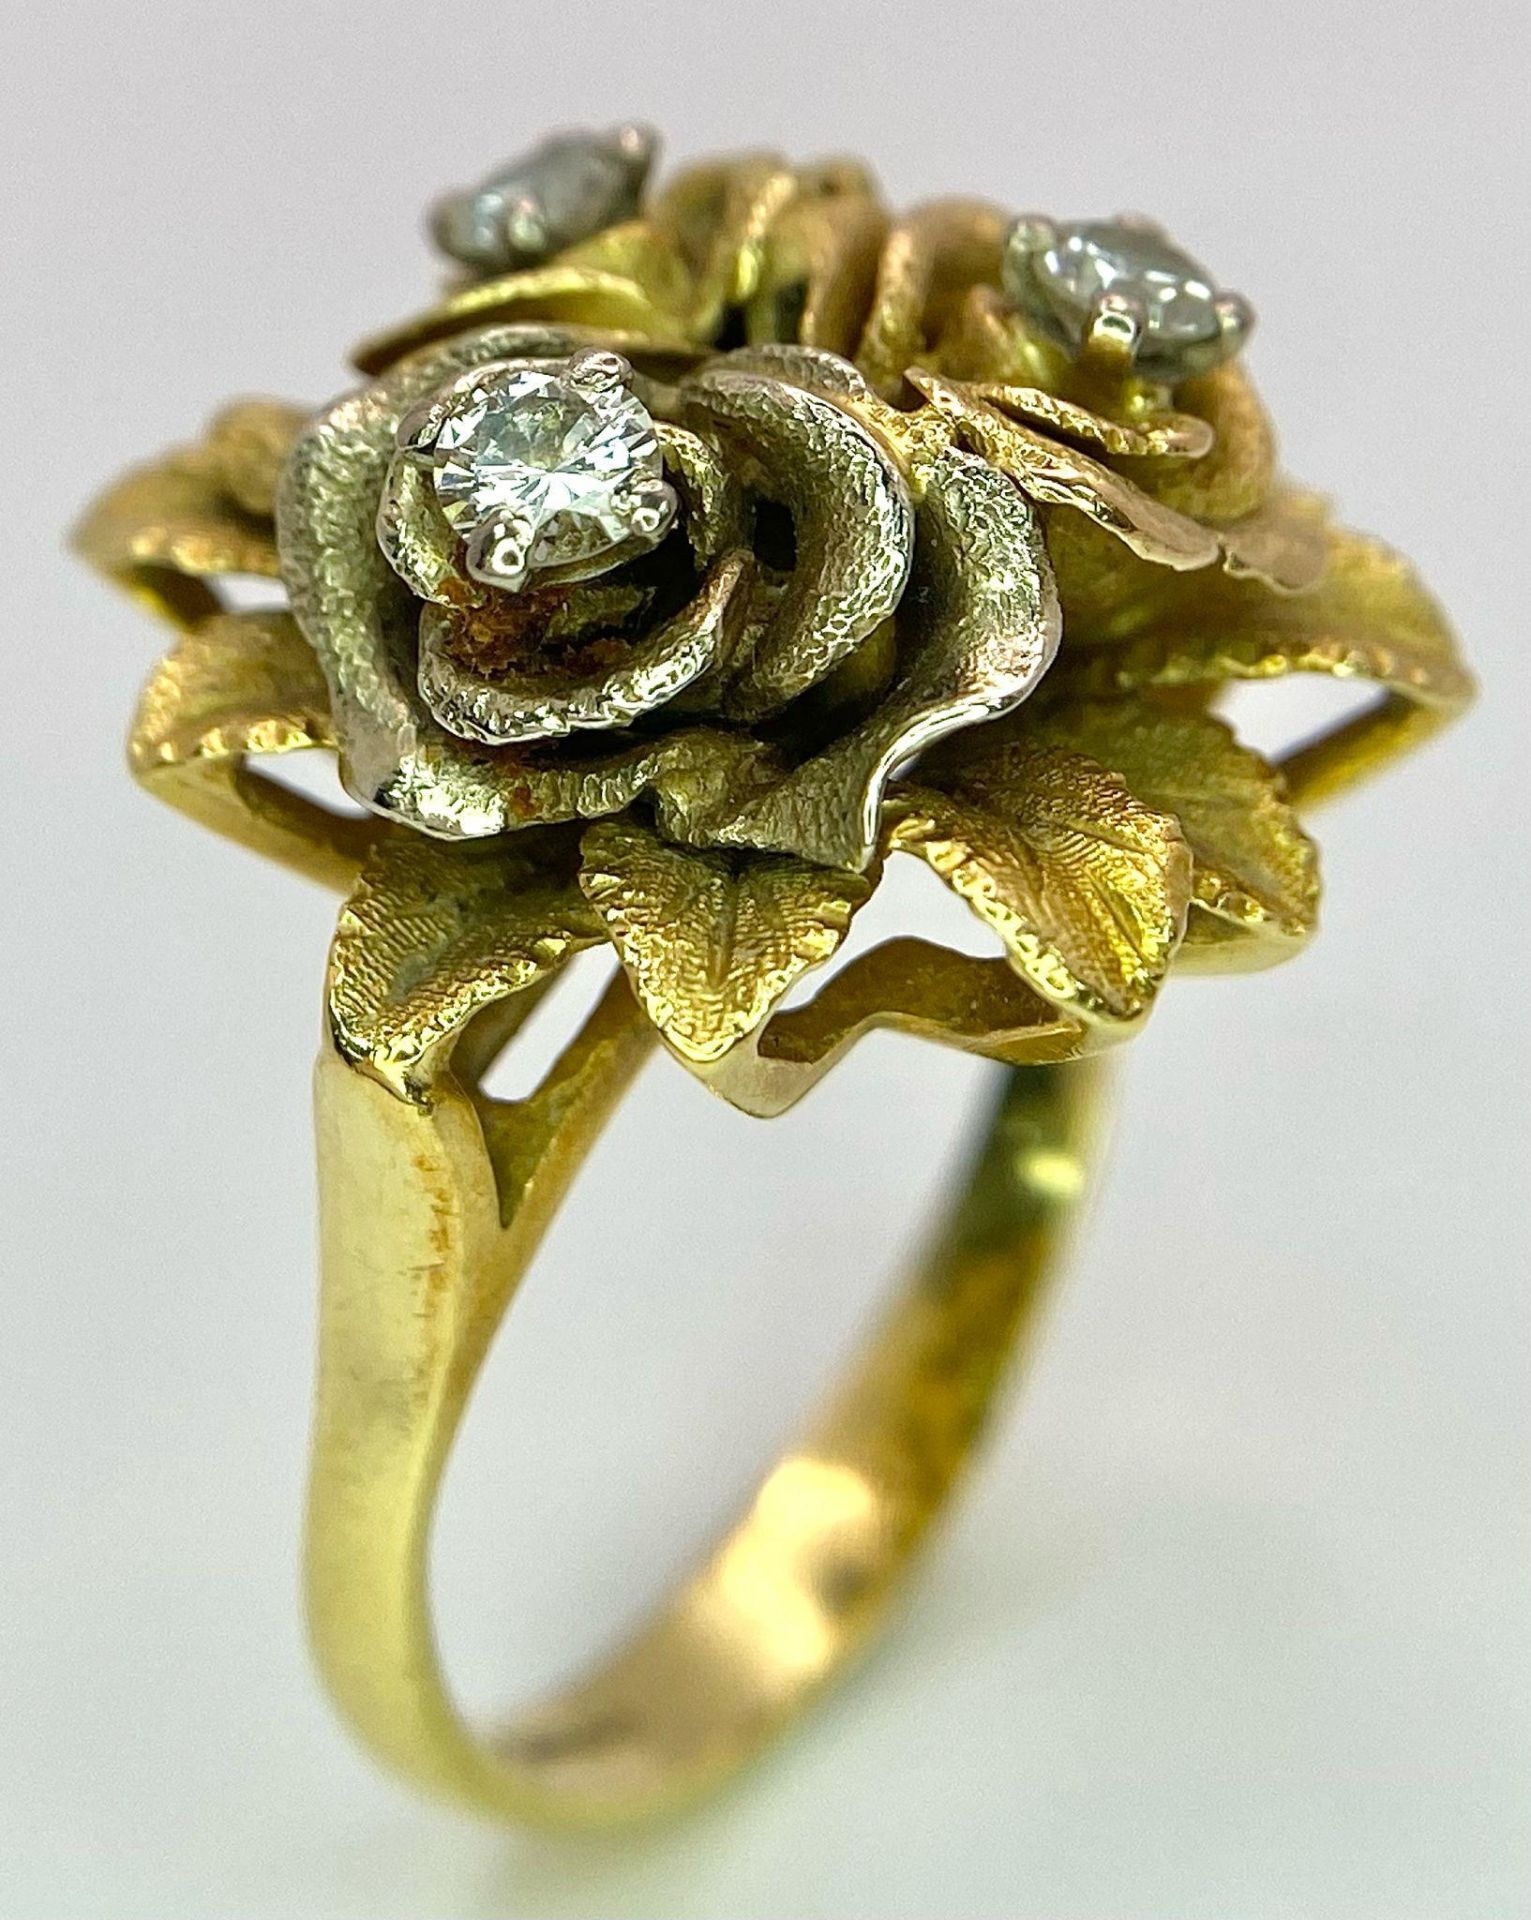 An 18K Yellow Gold and Diamond Floral Design Ring. A rich cluster of golden petals give sanctuary to - Image 5 of 9